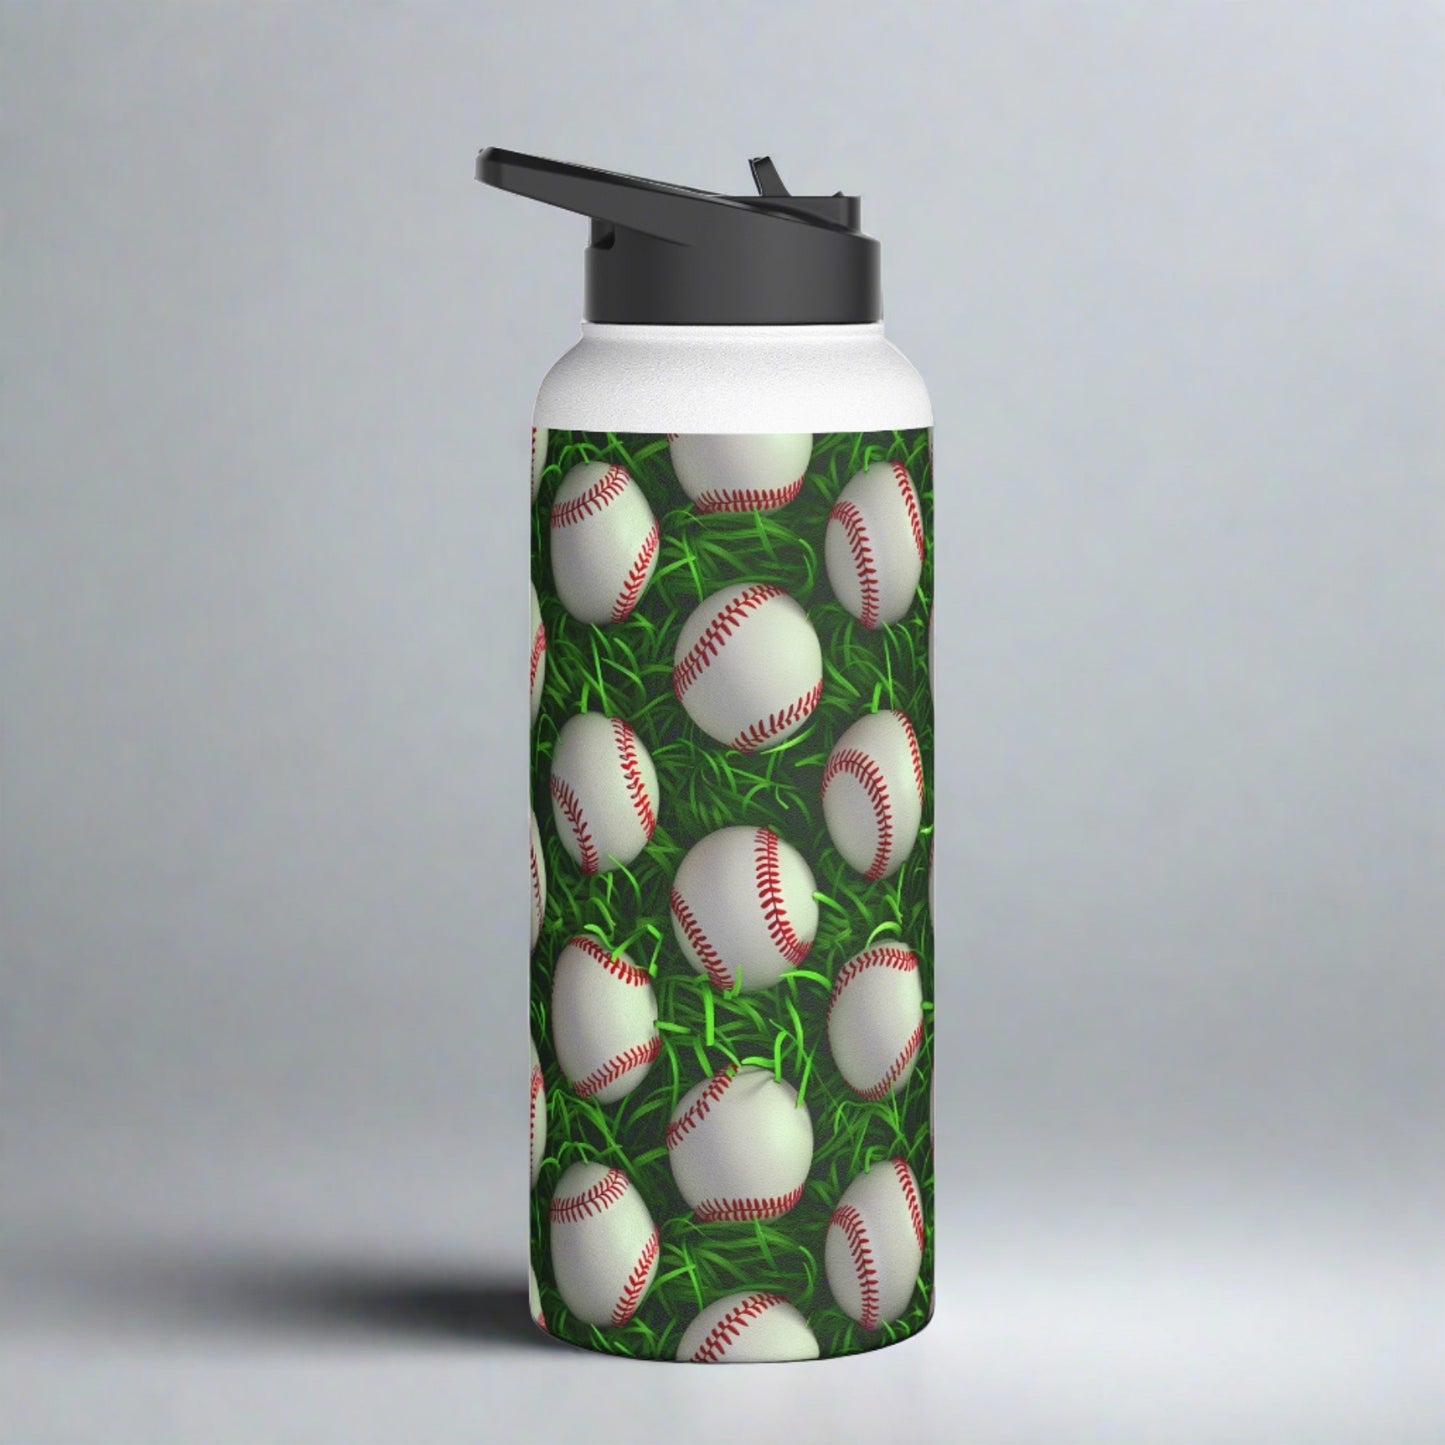 Stainless Steel Water Bottle Thermos, 32oz, 3D Baseball - Double Wall Insulation Keeps Drinks Hot or Cold